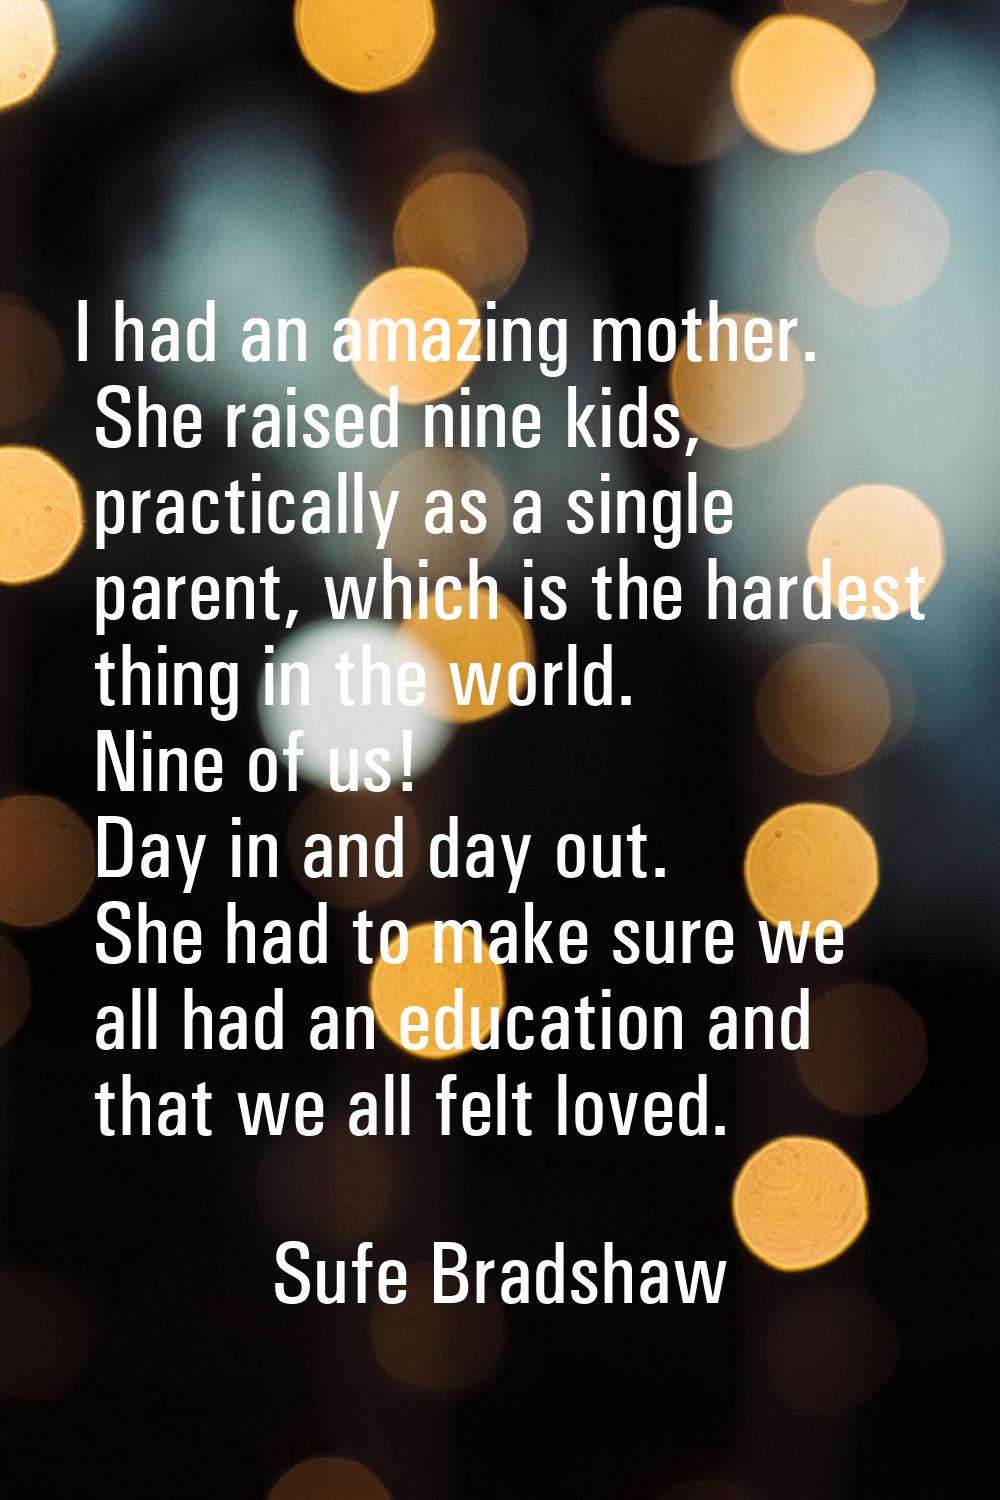 I had an amazing mother. She raised nine kids, practically as a single parent, which is the hardest